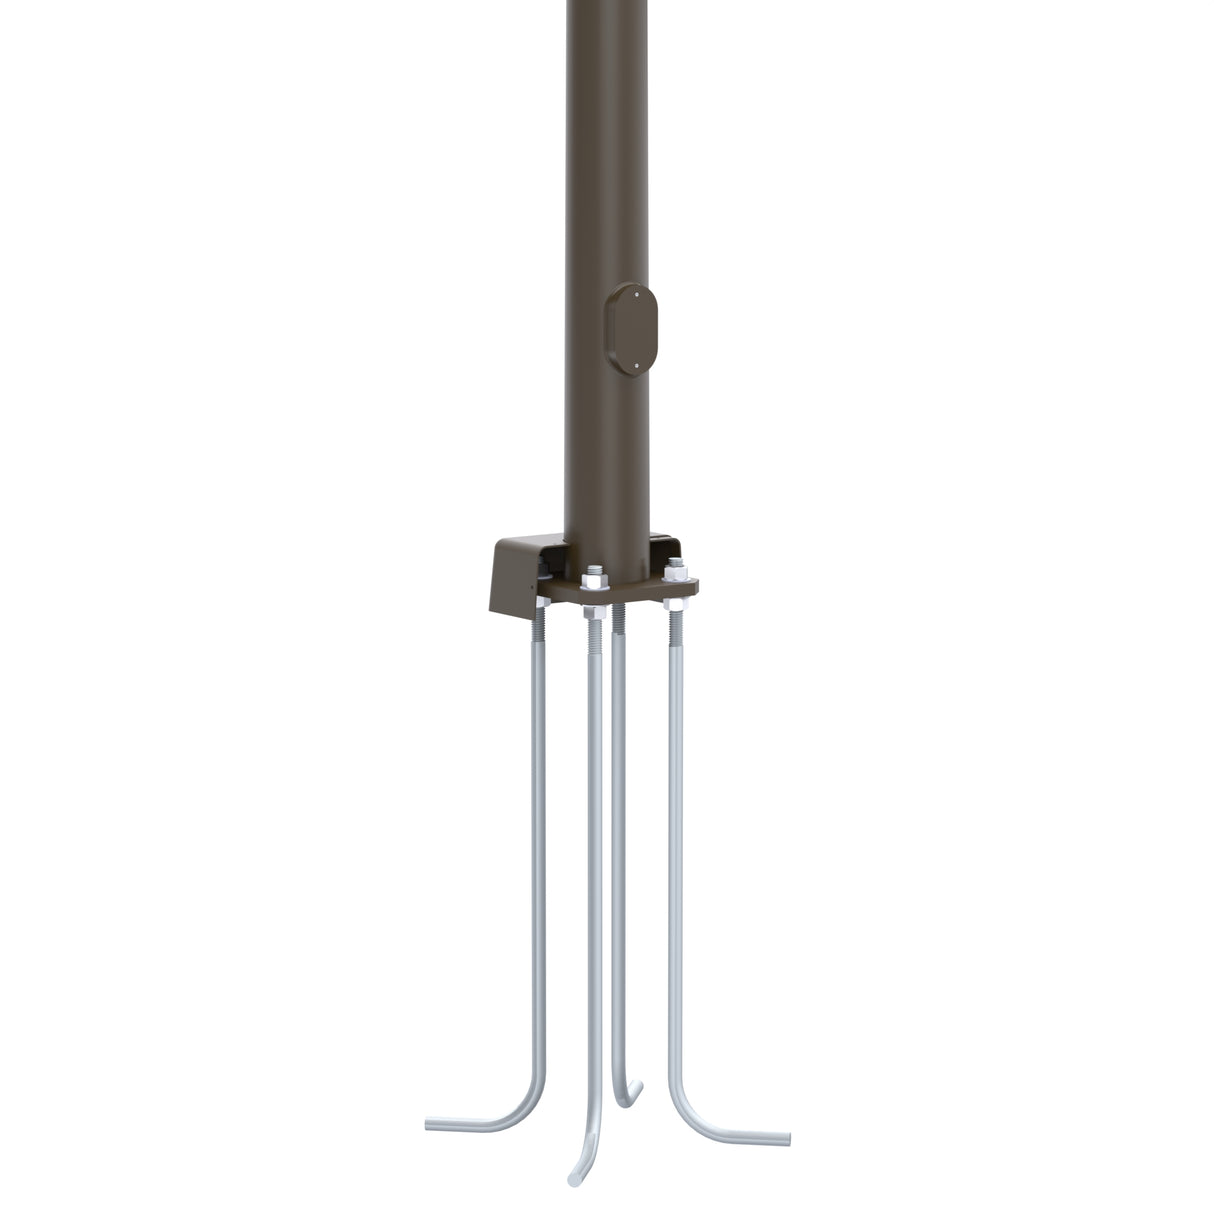 50' Tall x 13" Base OD x 6.0" Top OD x 7ga Thick, Round Tapered Steel, Anchor Base Light Pole